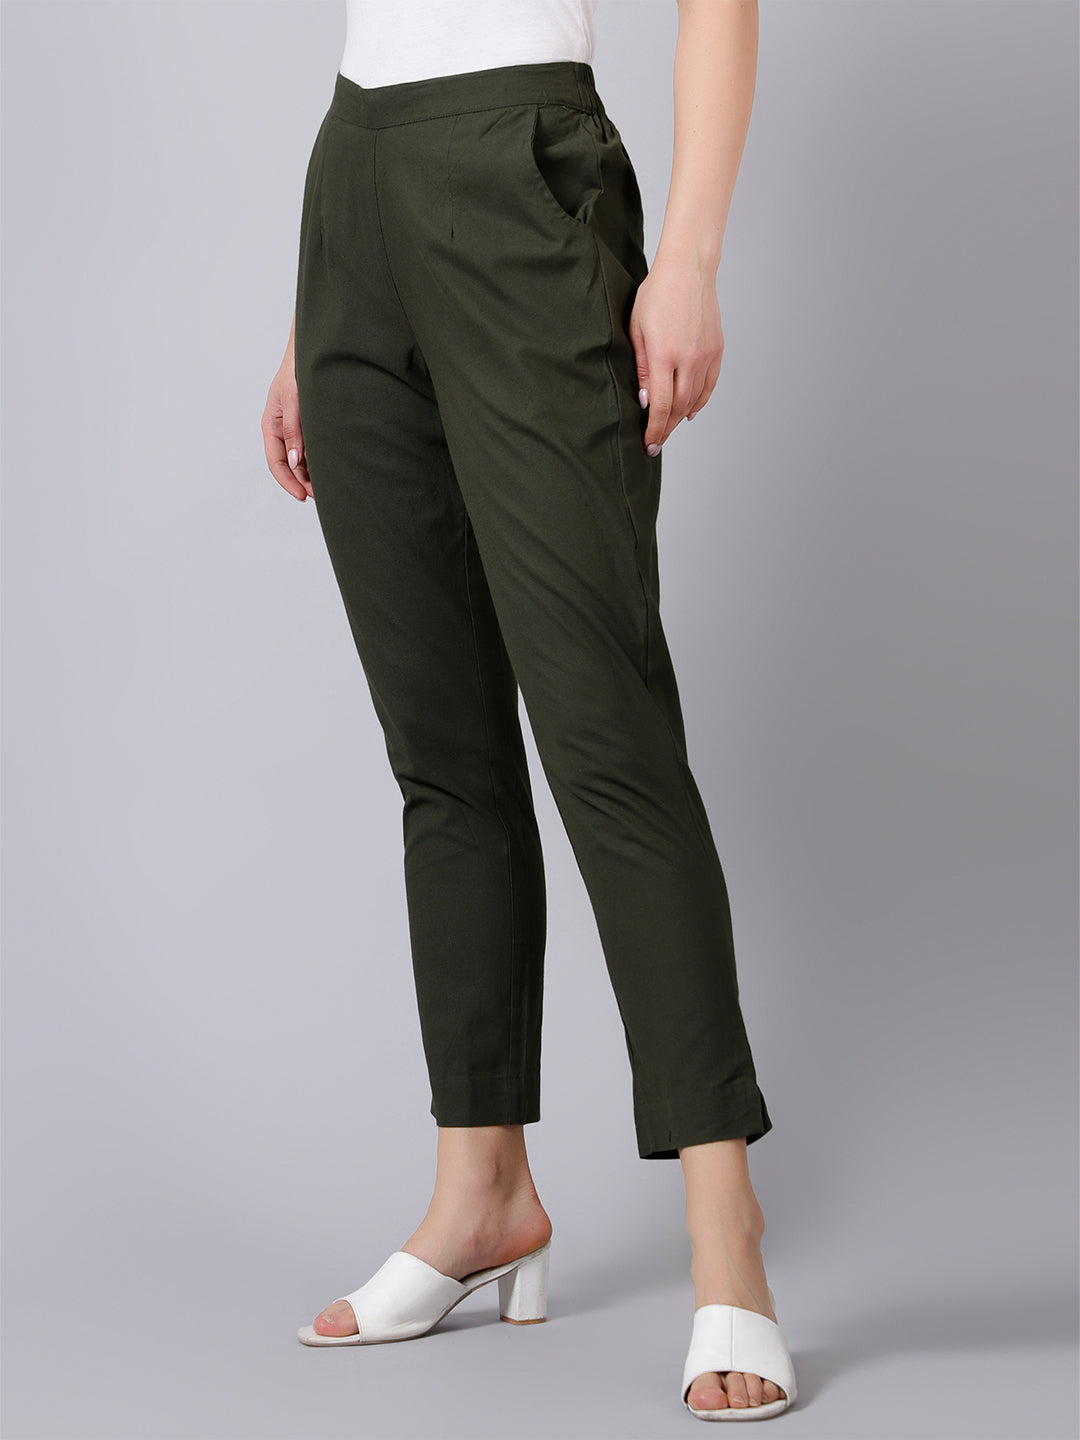 Olive Green Solid Pants